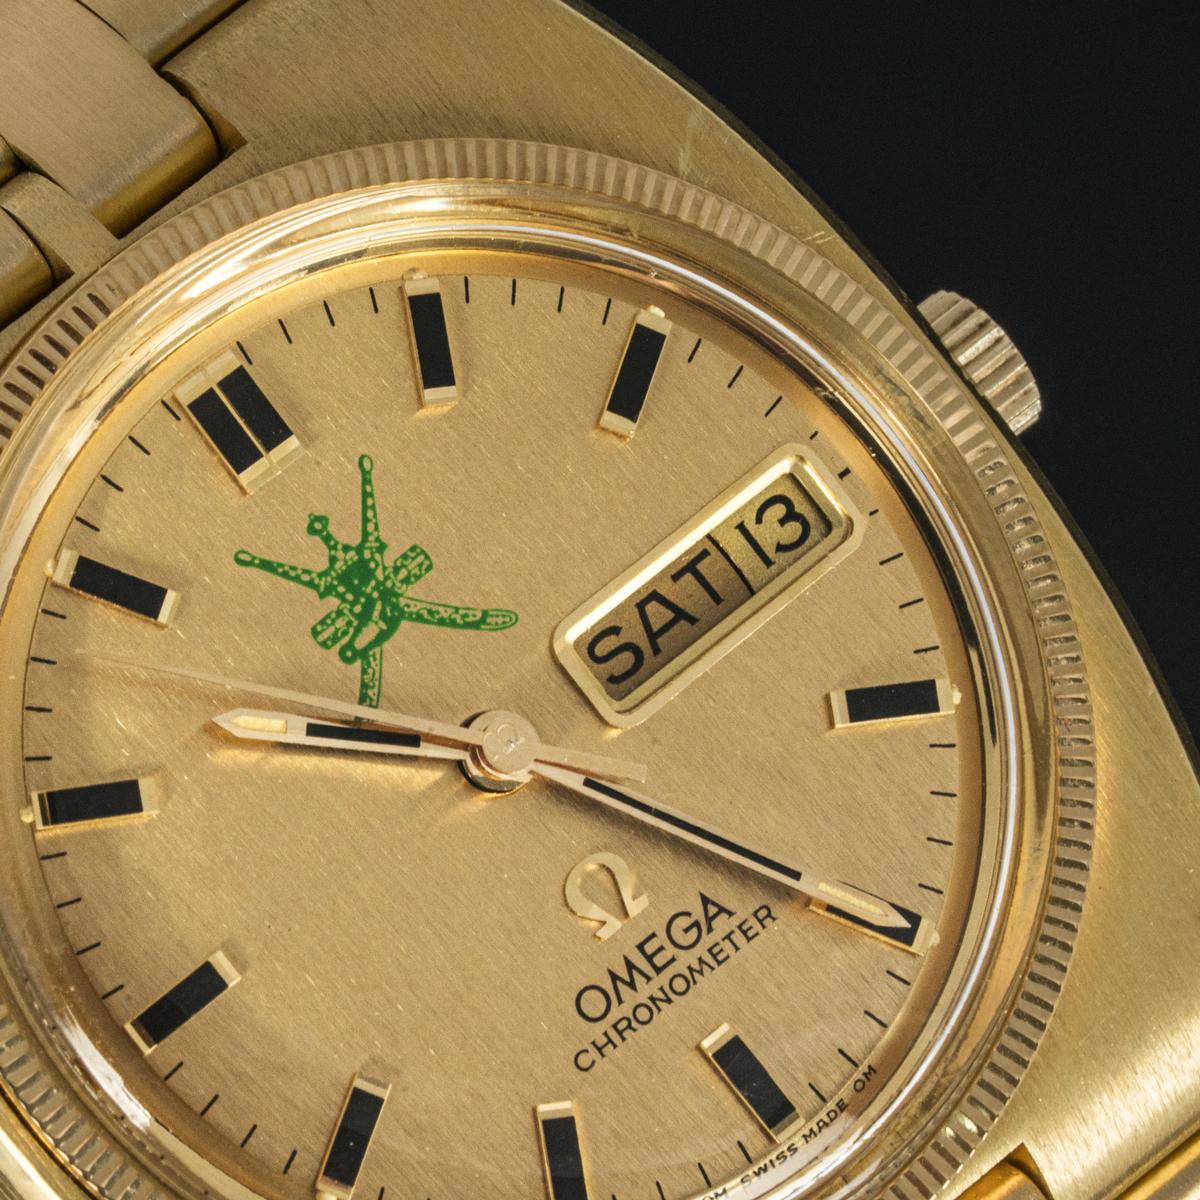 A 36mm Omega Constellation BA 368 crafted in yellow gold by Omega. Featuring a solid yellow gold dial with a date aperture and a distinctive logo of the Khanjar which represents Oman's national emblem.

The watch is also fitted with a plastic glass,